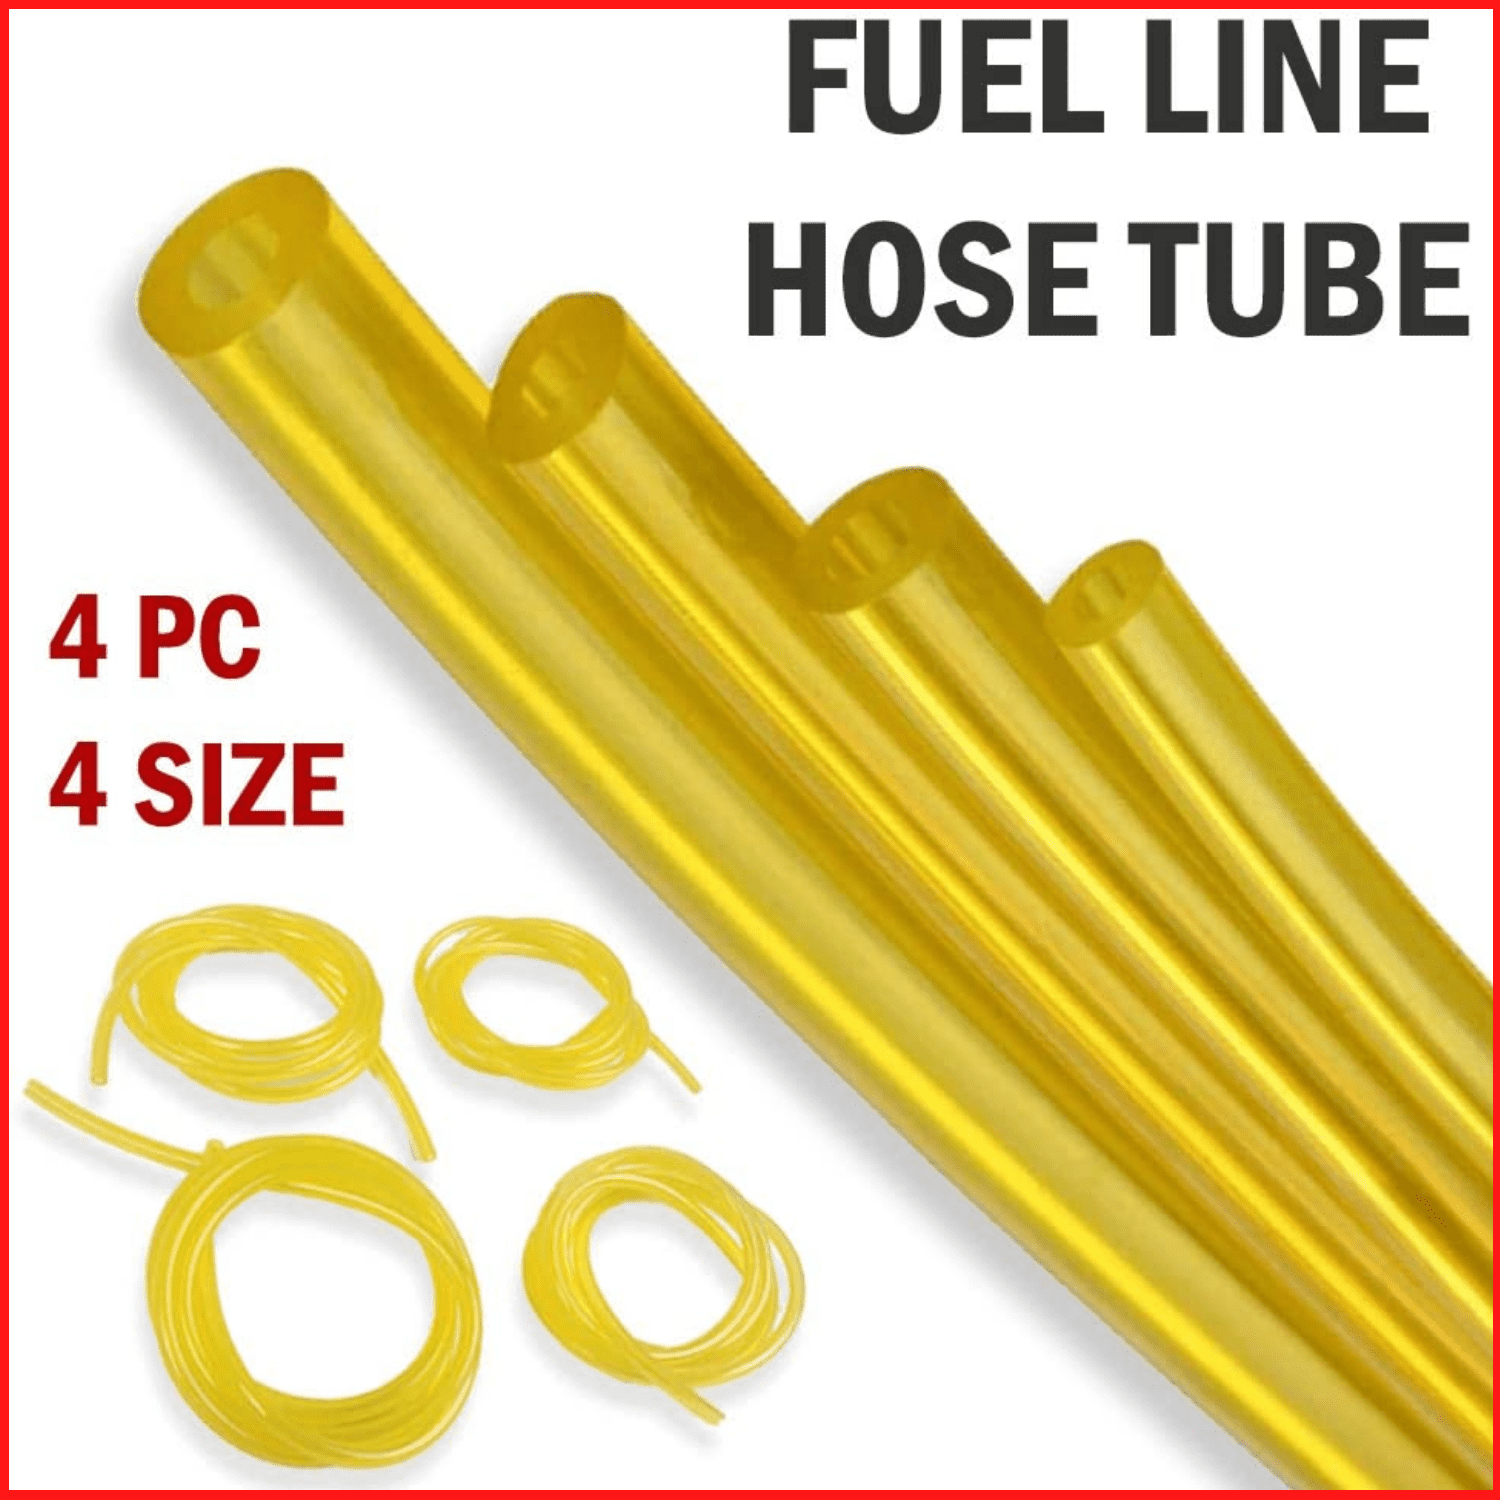 Petrol Fuel Line Hose Gas Pipe Tubing 4 Sizes For Trimmer Chainsaw Blower Tools